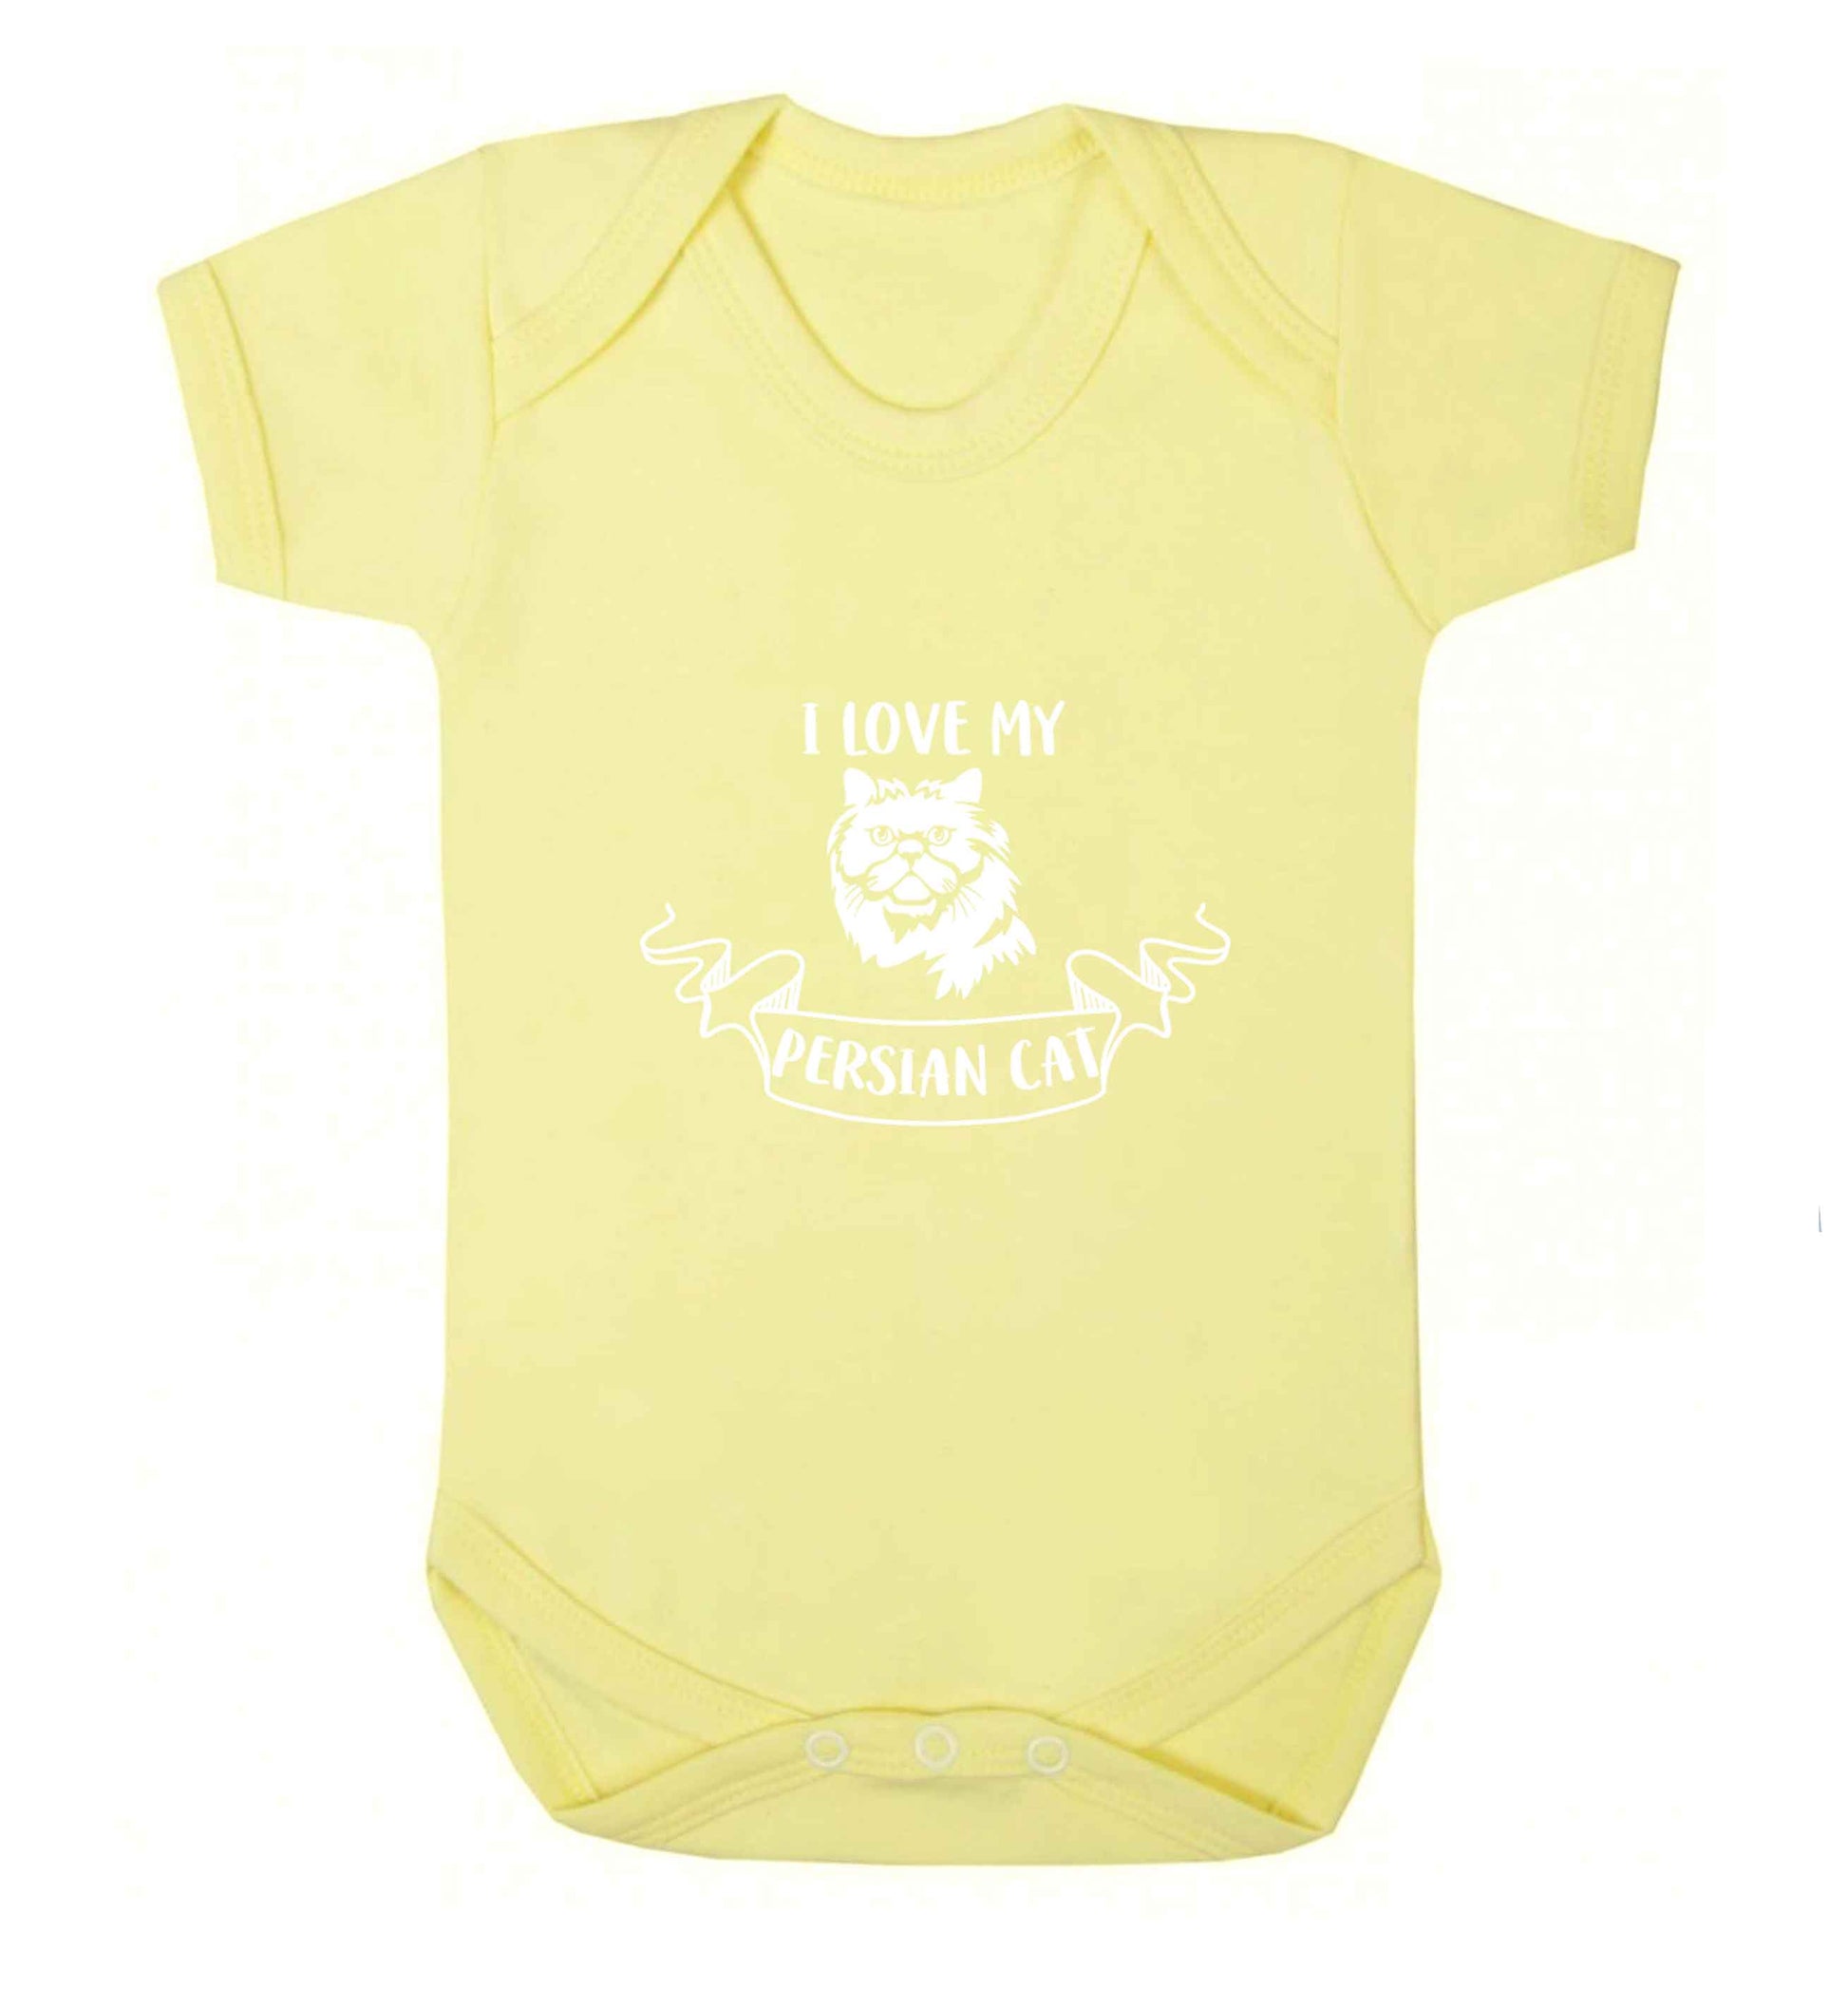 I love my persian cat baby vest pale yellow 18-24 months